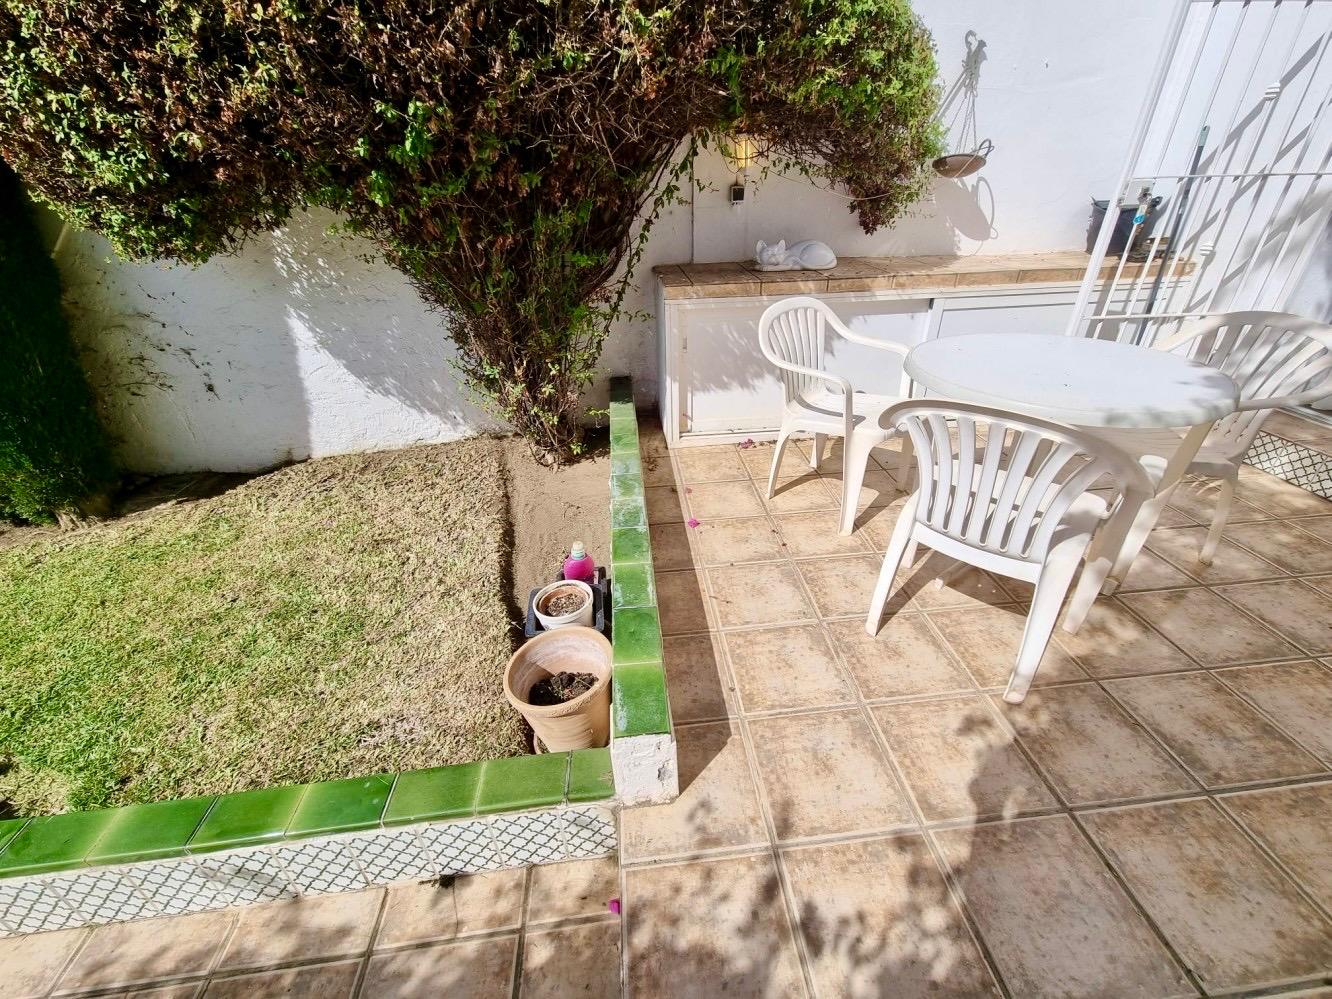 2 BEDROOM TOWNHOUSE WITH 3 TERRACES, GARDEN AND COMMUNITY POOL - NERJA, CAPISTRANO